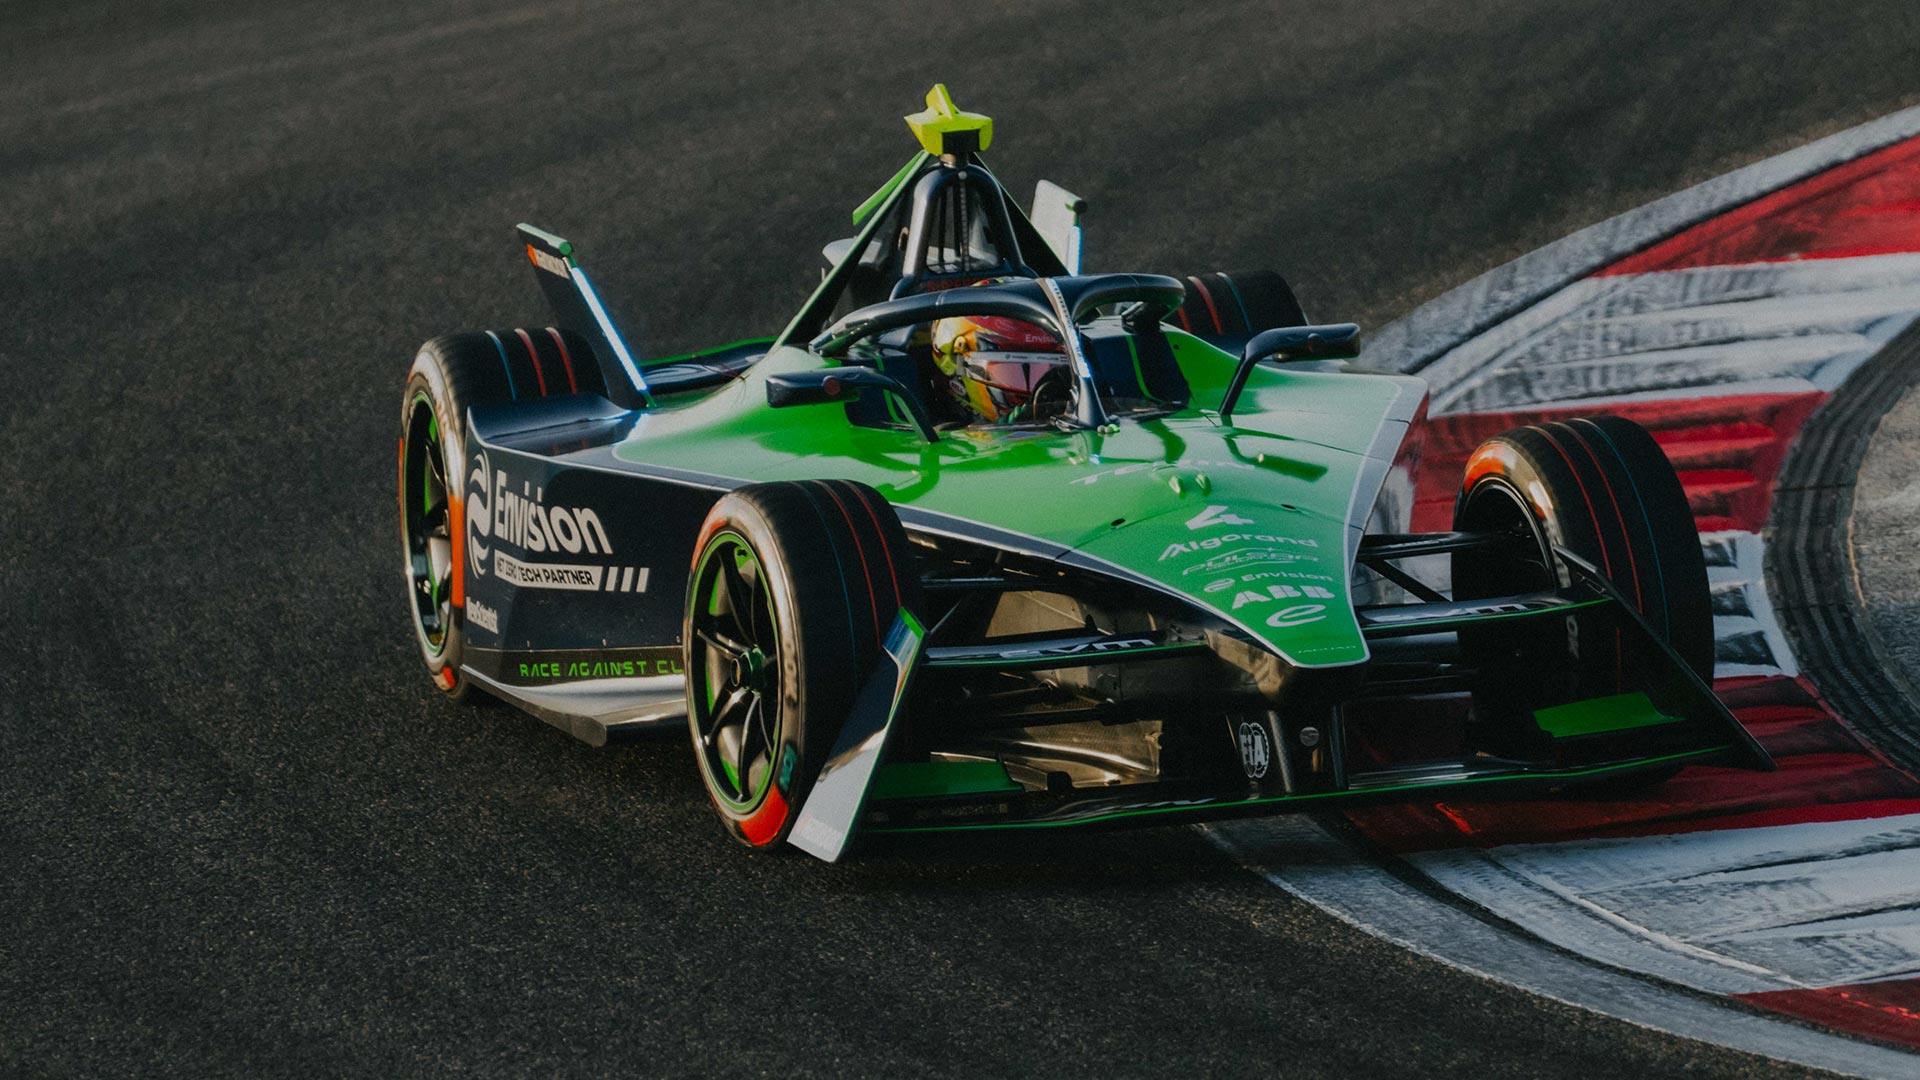 Envision Racing chooses Roboze's 3D printing with strategic materials for Formula E